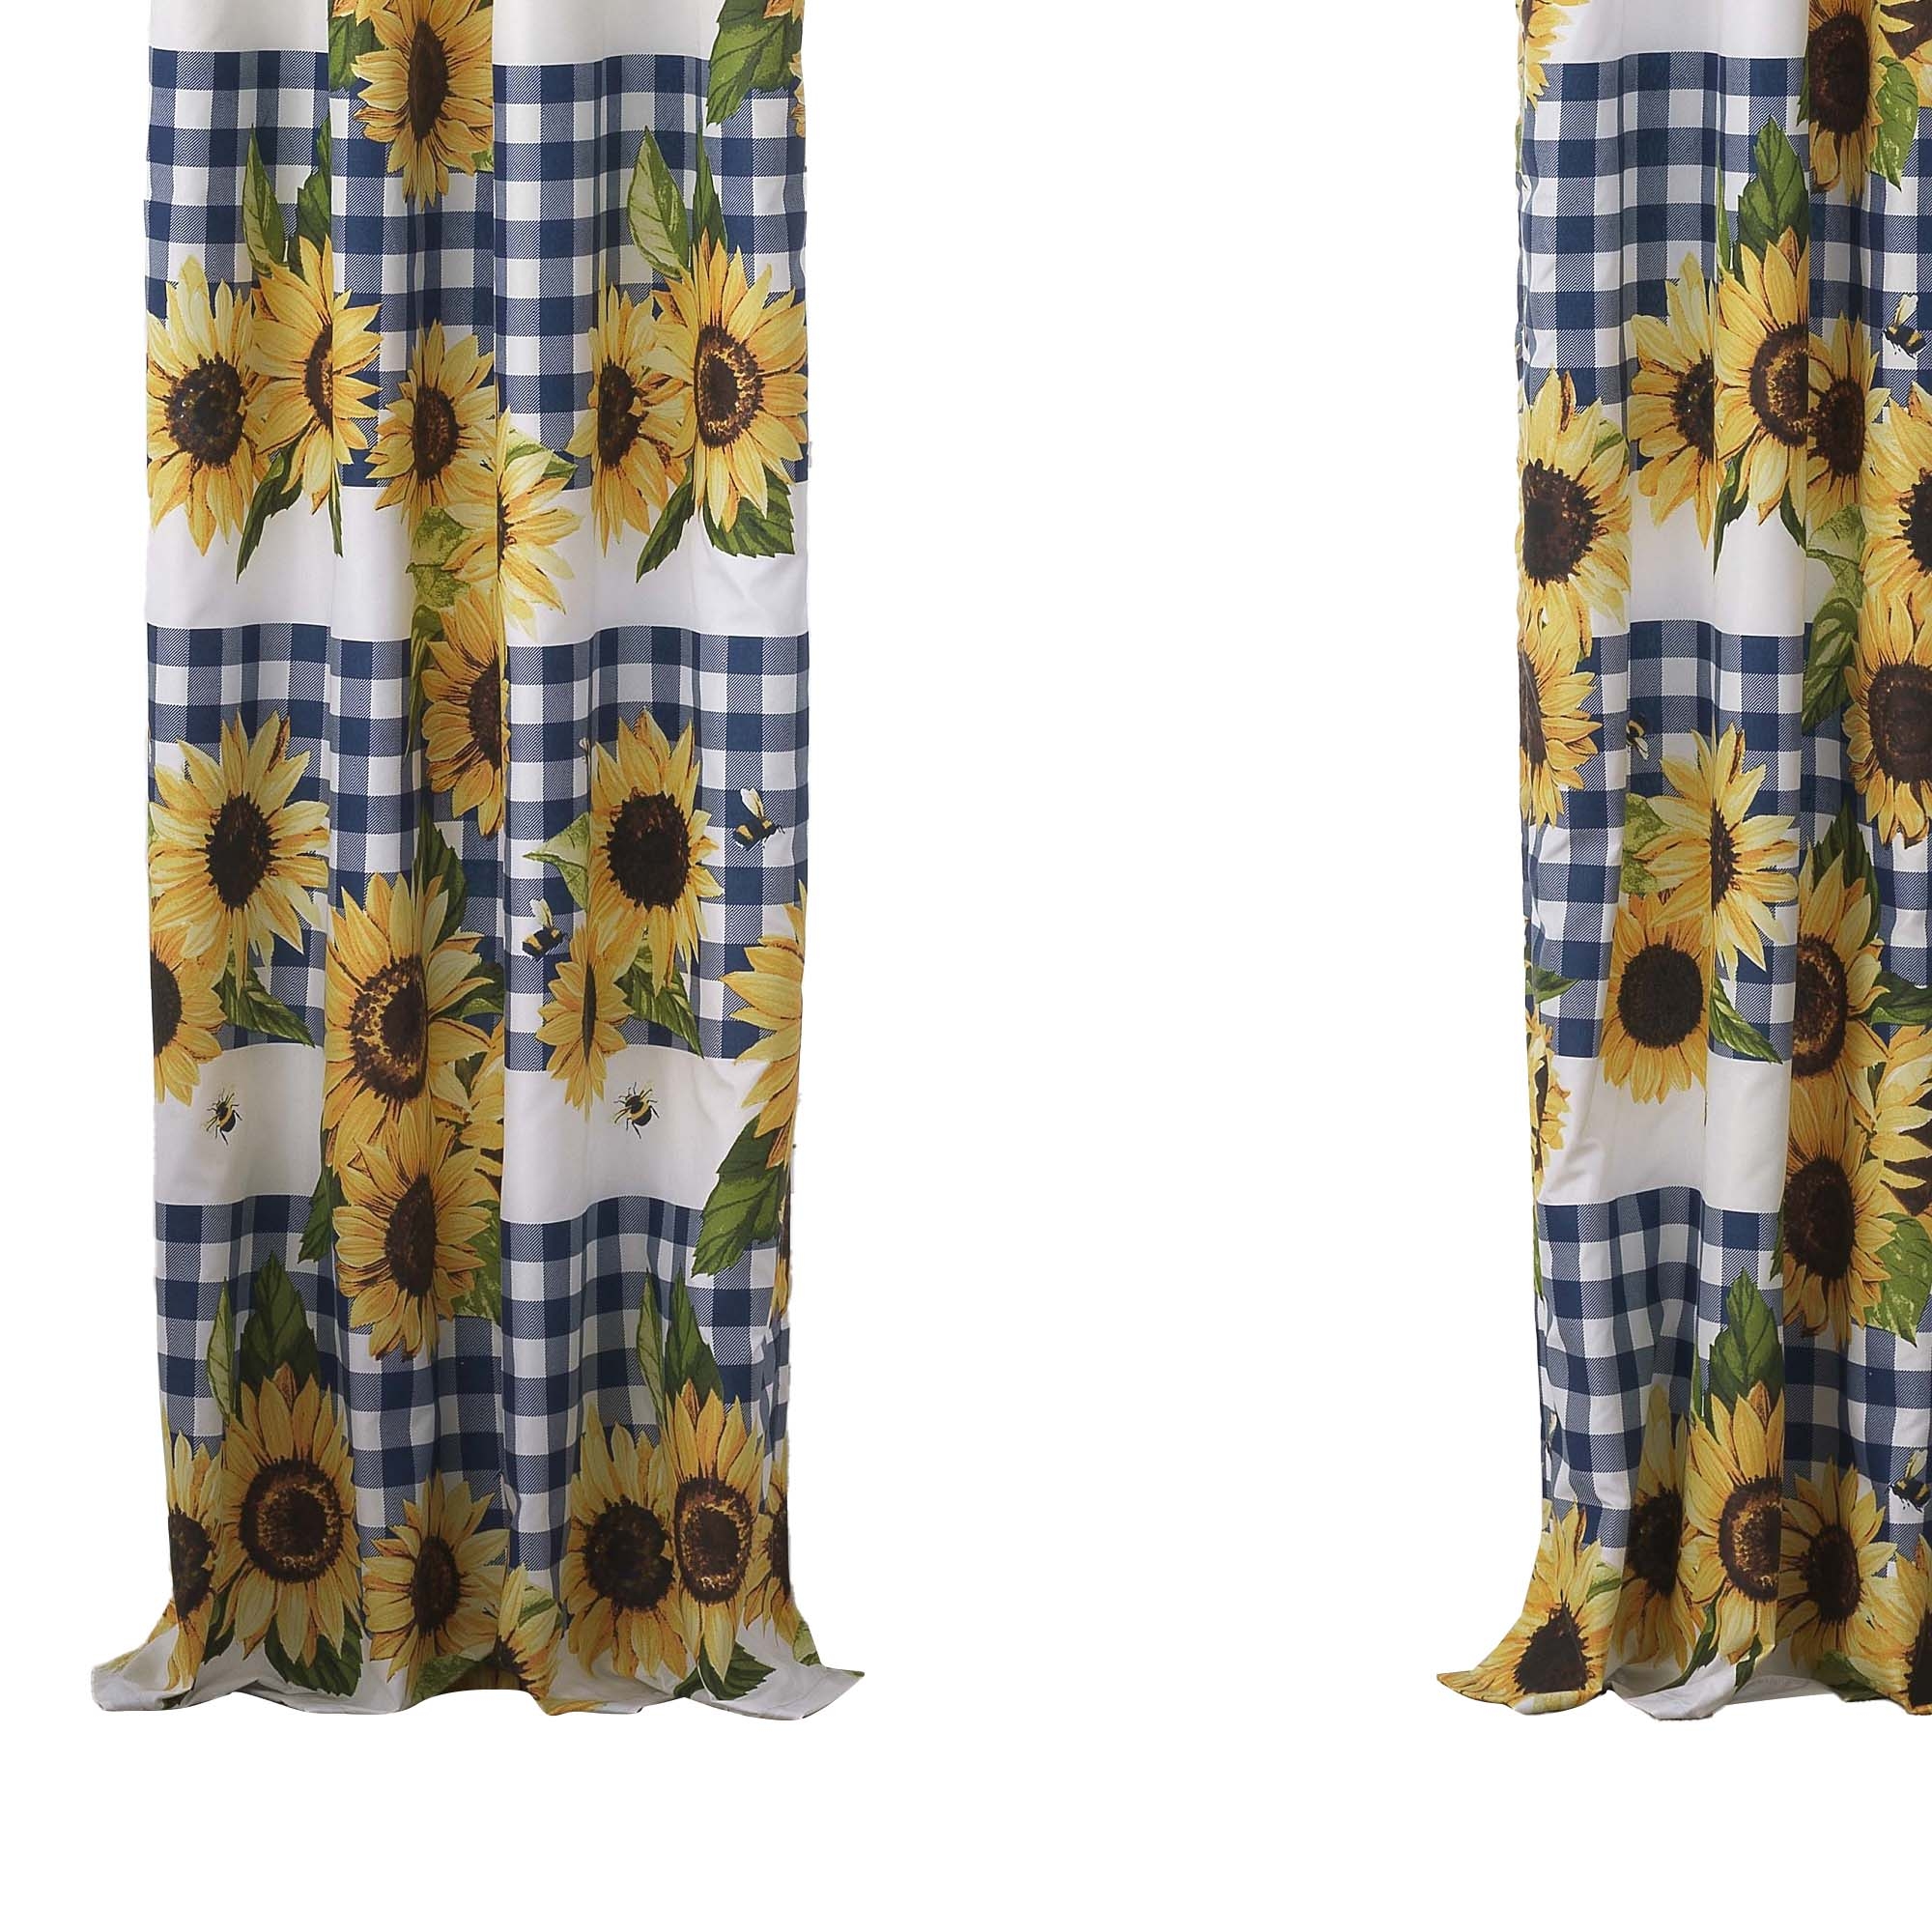 Oslo 84 Inch Panel Curtains, Microfiber Polyester, Yellow Sunflower Print